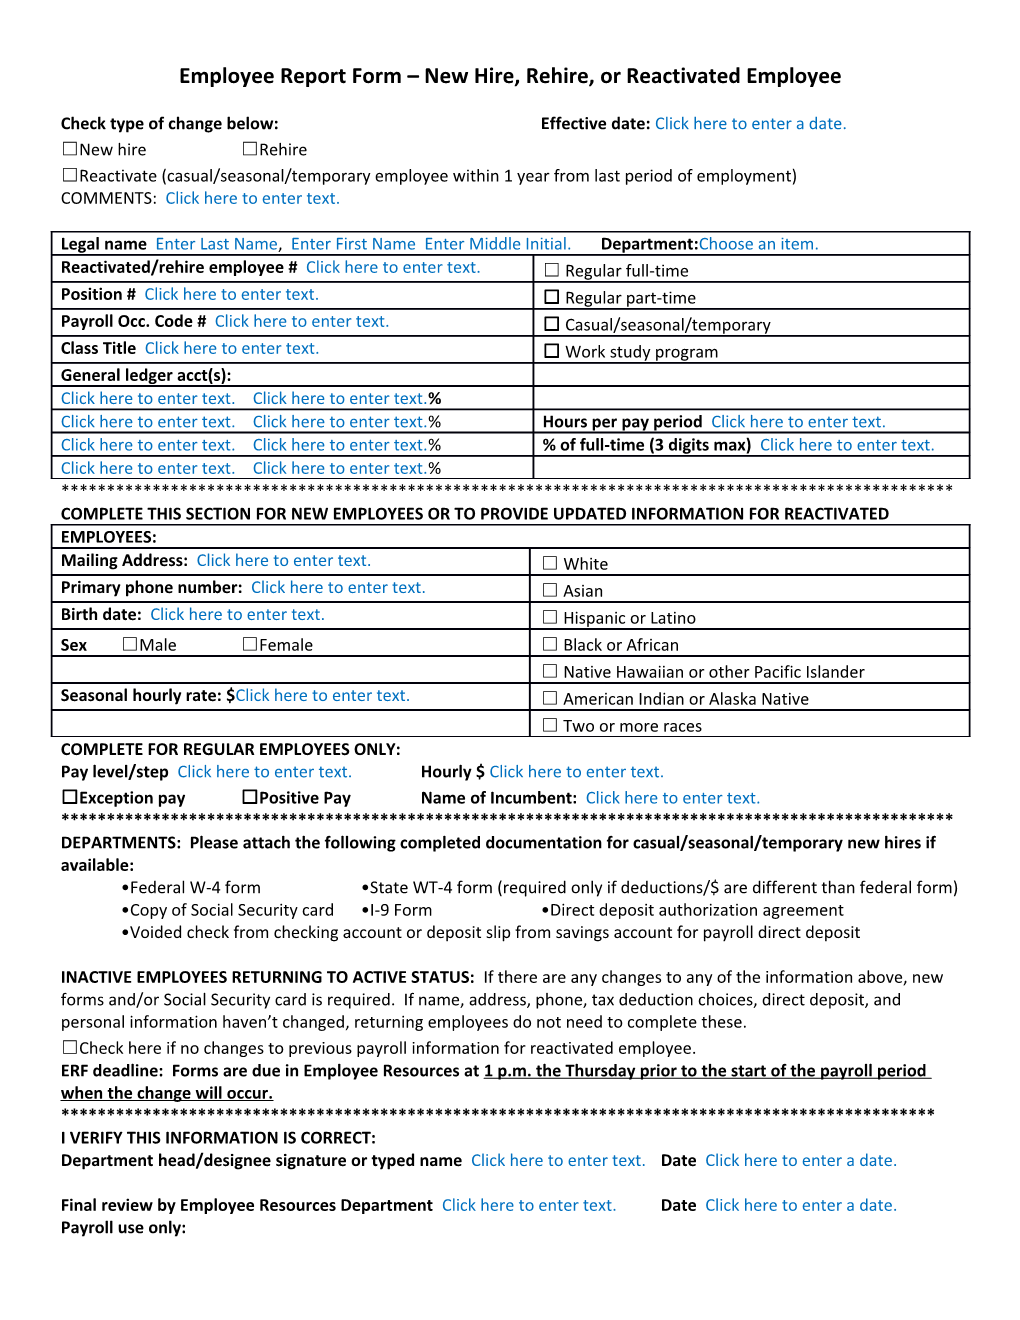 Employee Report Form New Hire, Rehire, Or Reactivated Employee